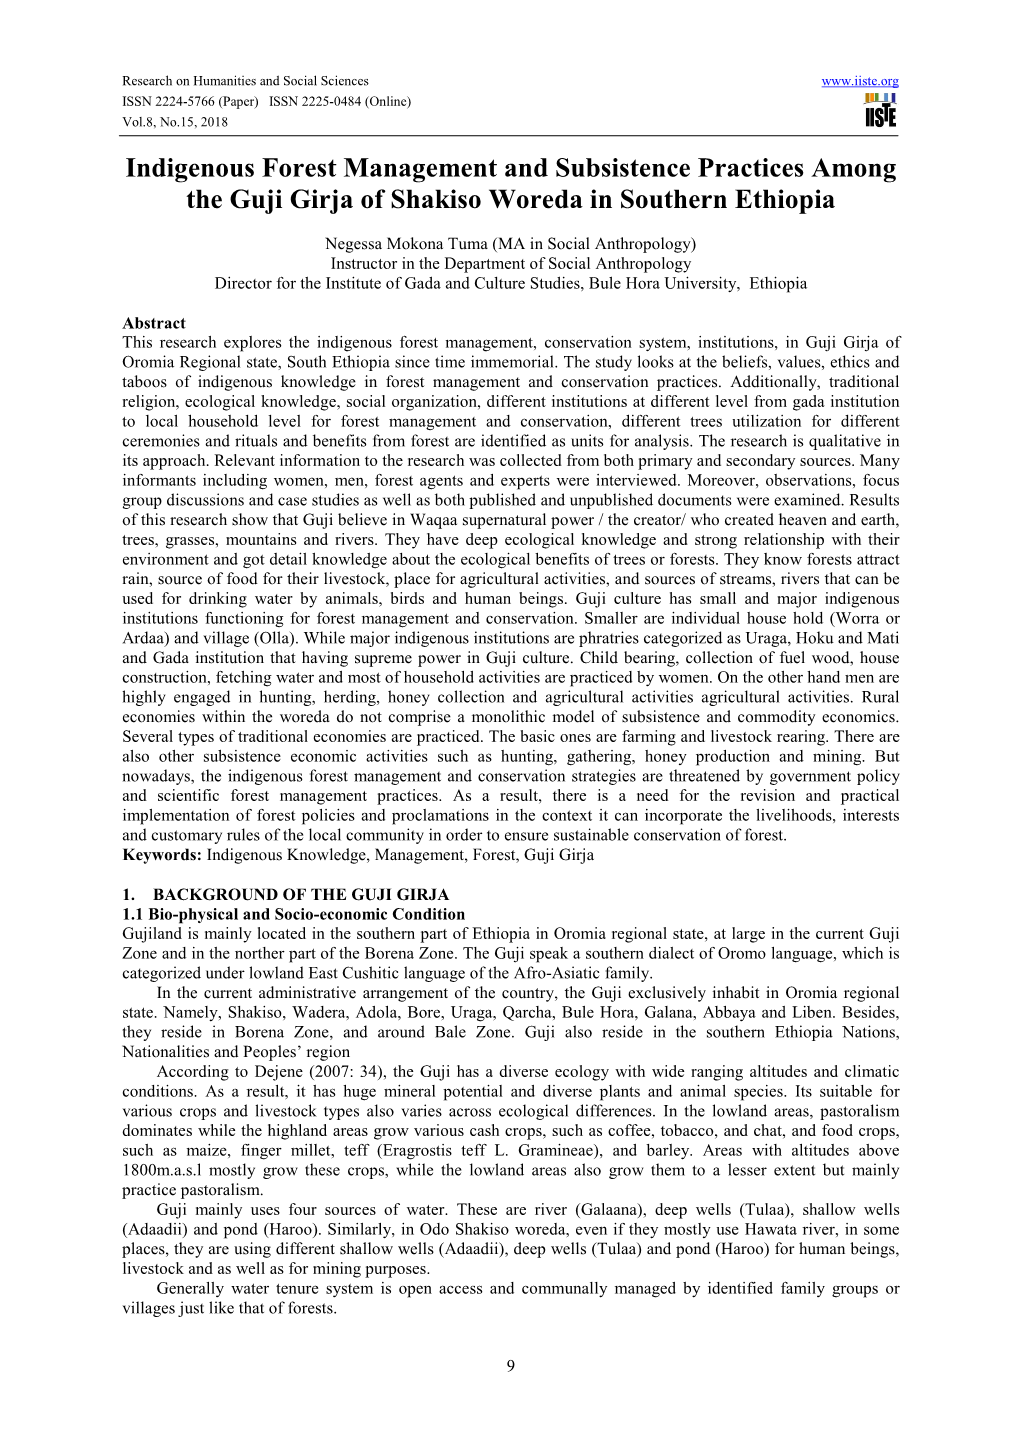 Indigenous Forest Management and Subsistence Practices Among the Guji Girja of Shakiso Woreda in Southern Ethiopia